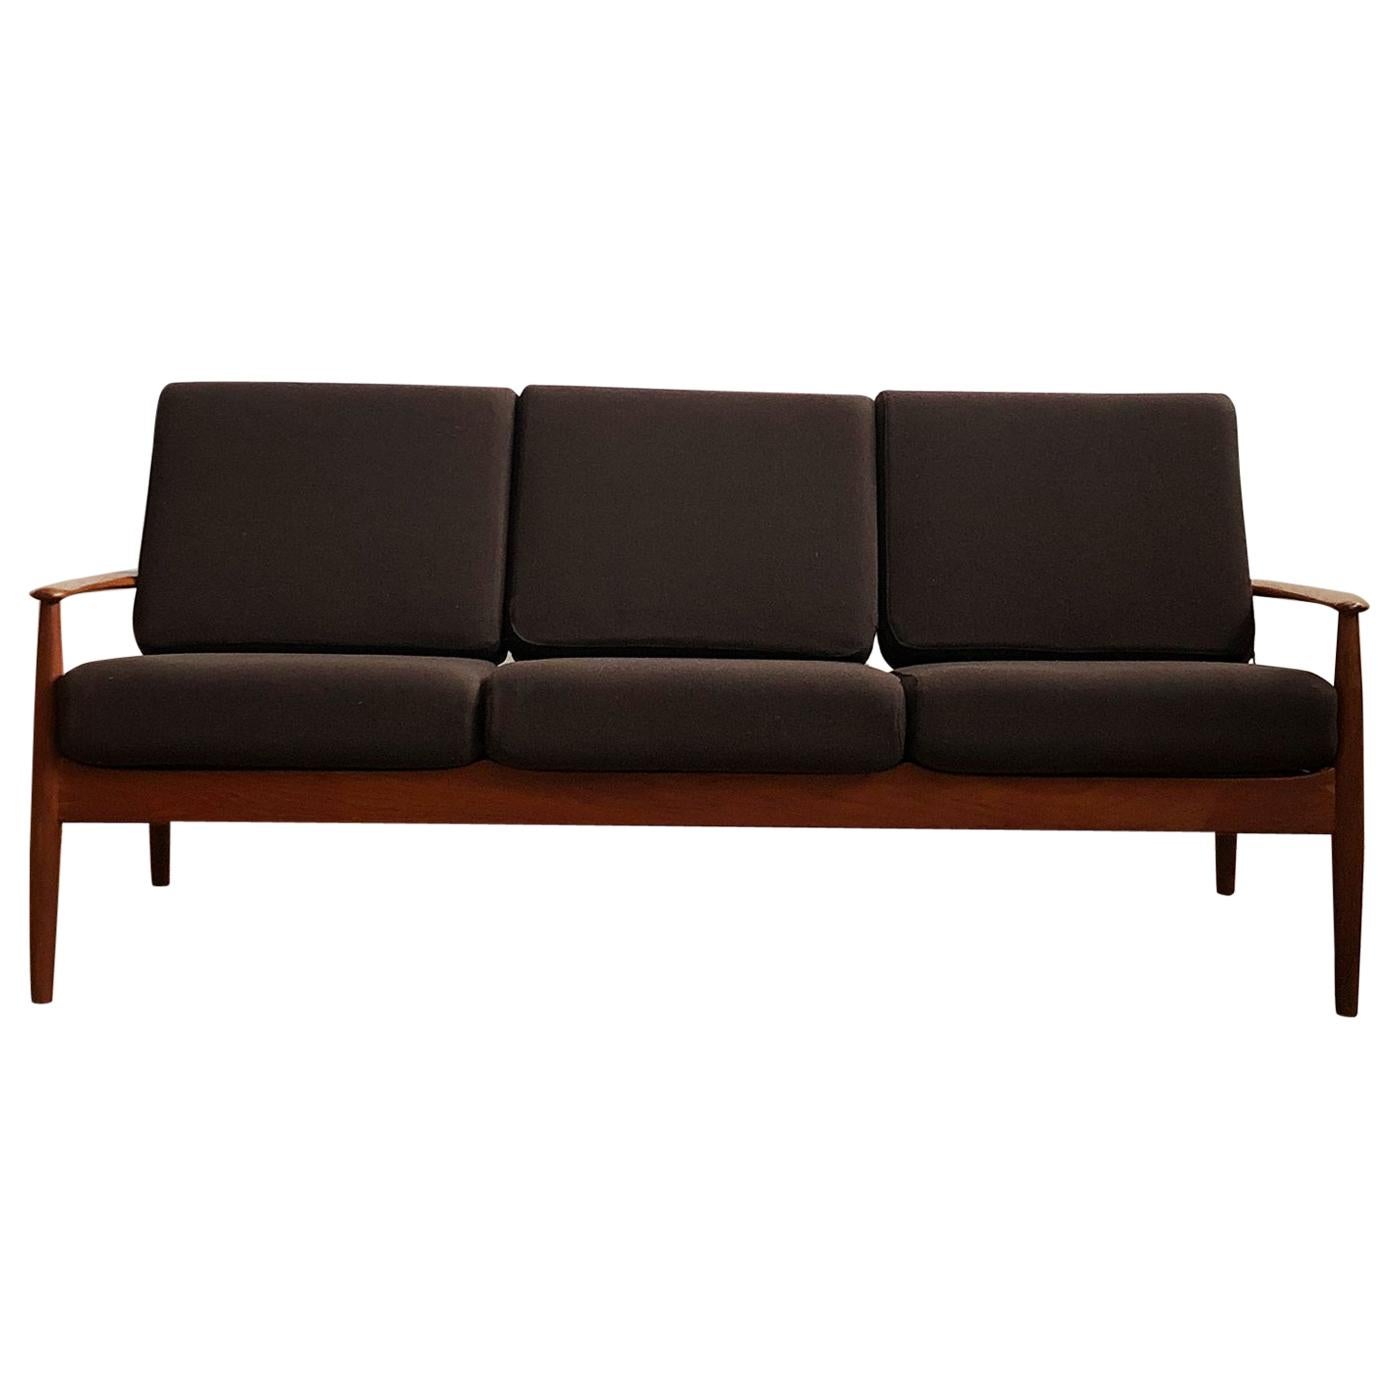 Midcentury Teak Sofa with Brown Upholstery by Grete Jalk For France & Son For Sale